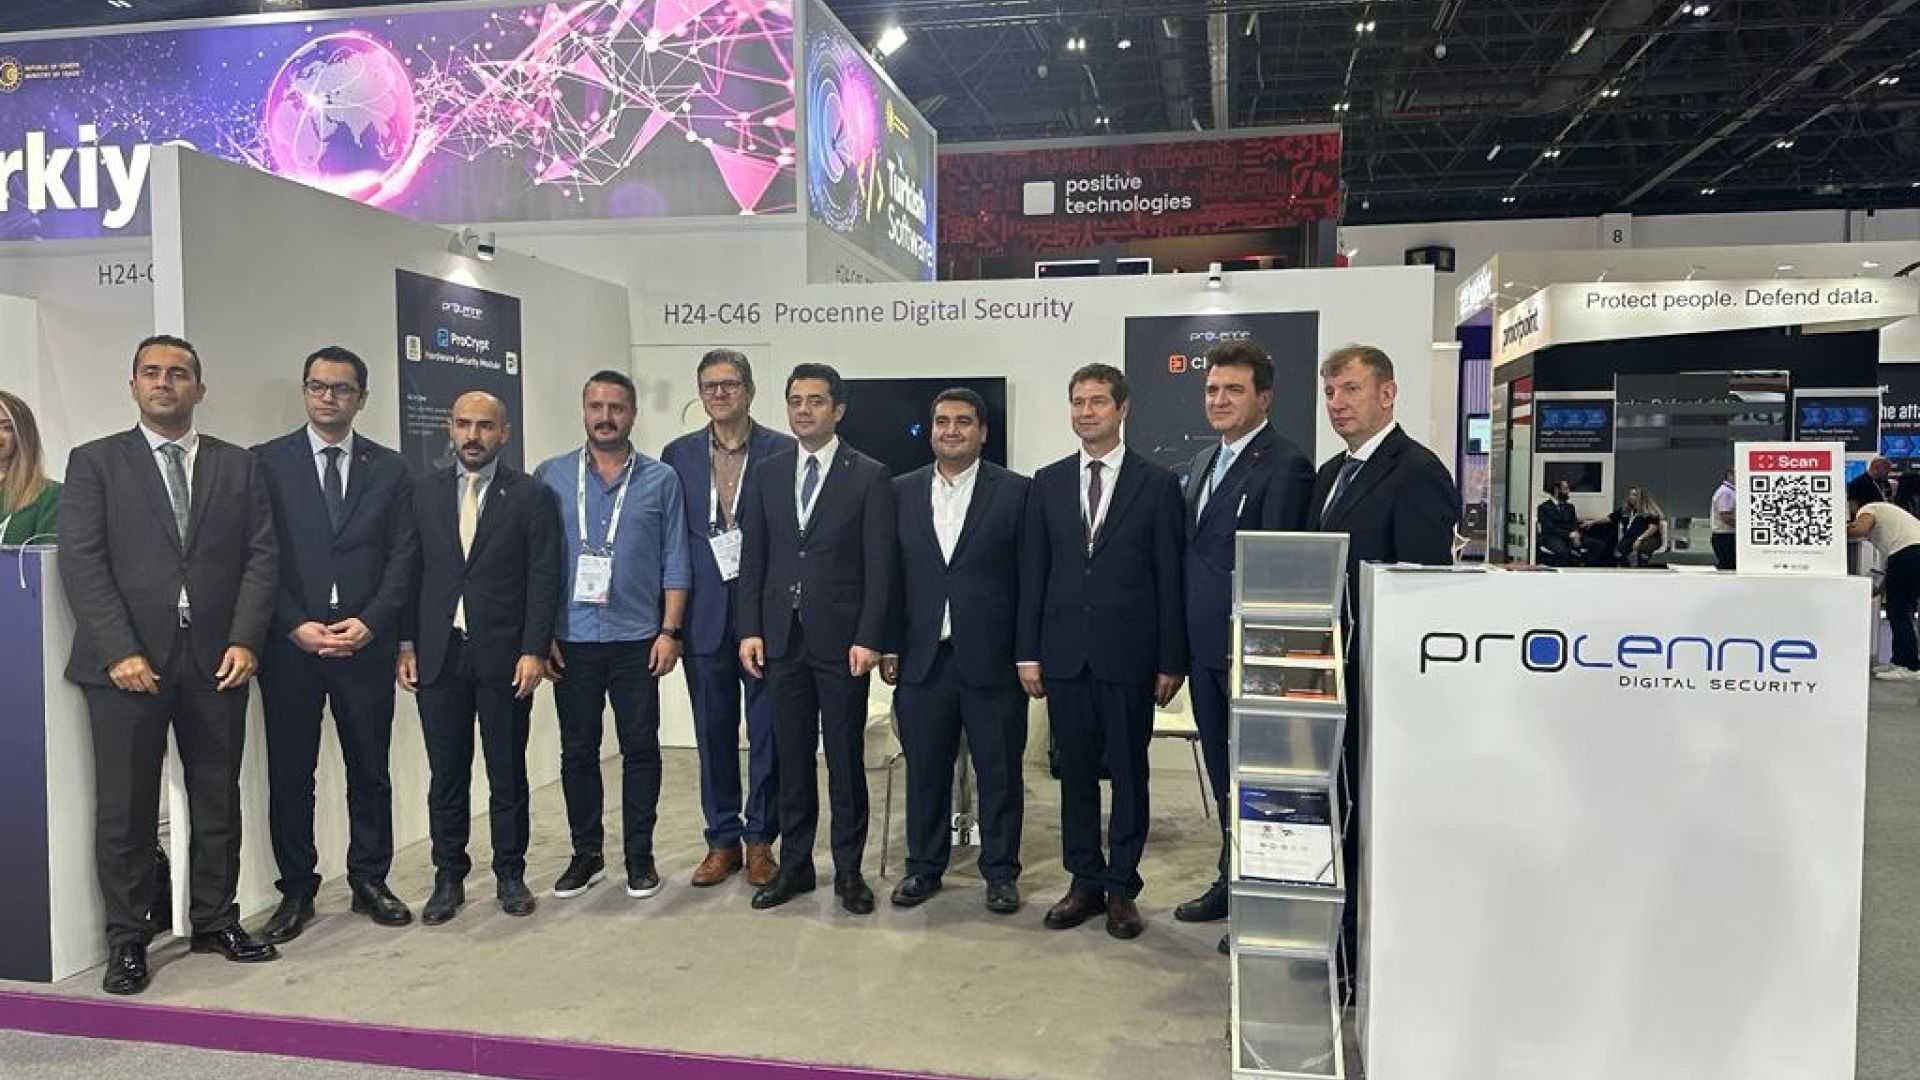 Procenne Attended GITEX Again